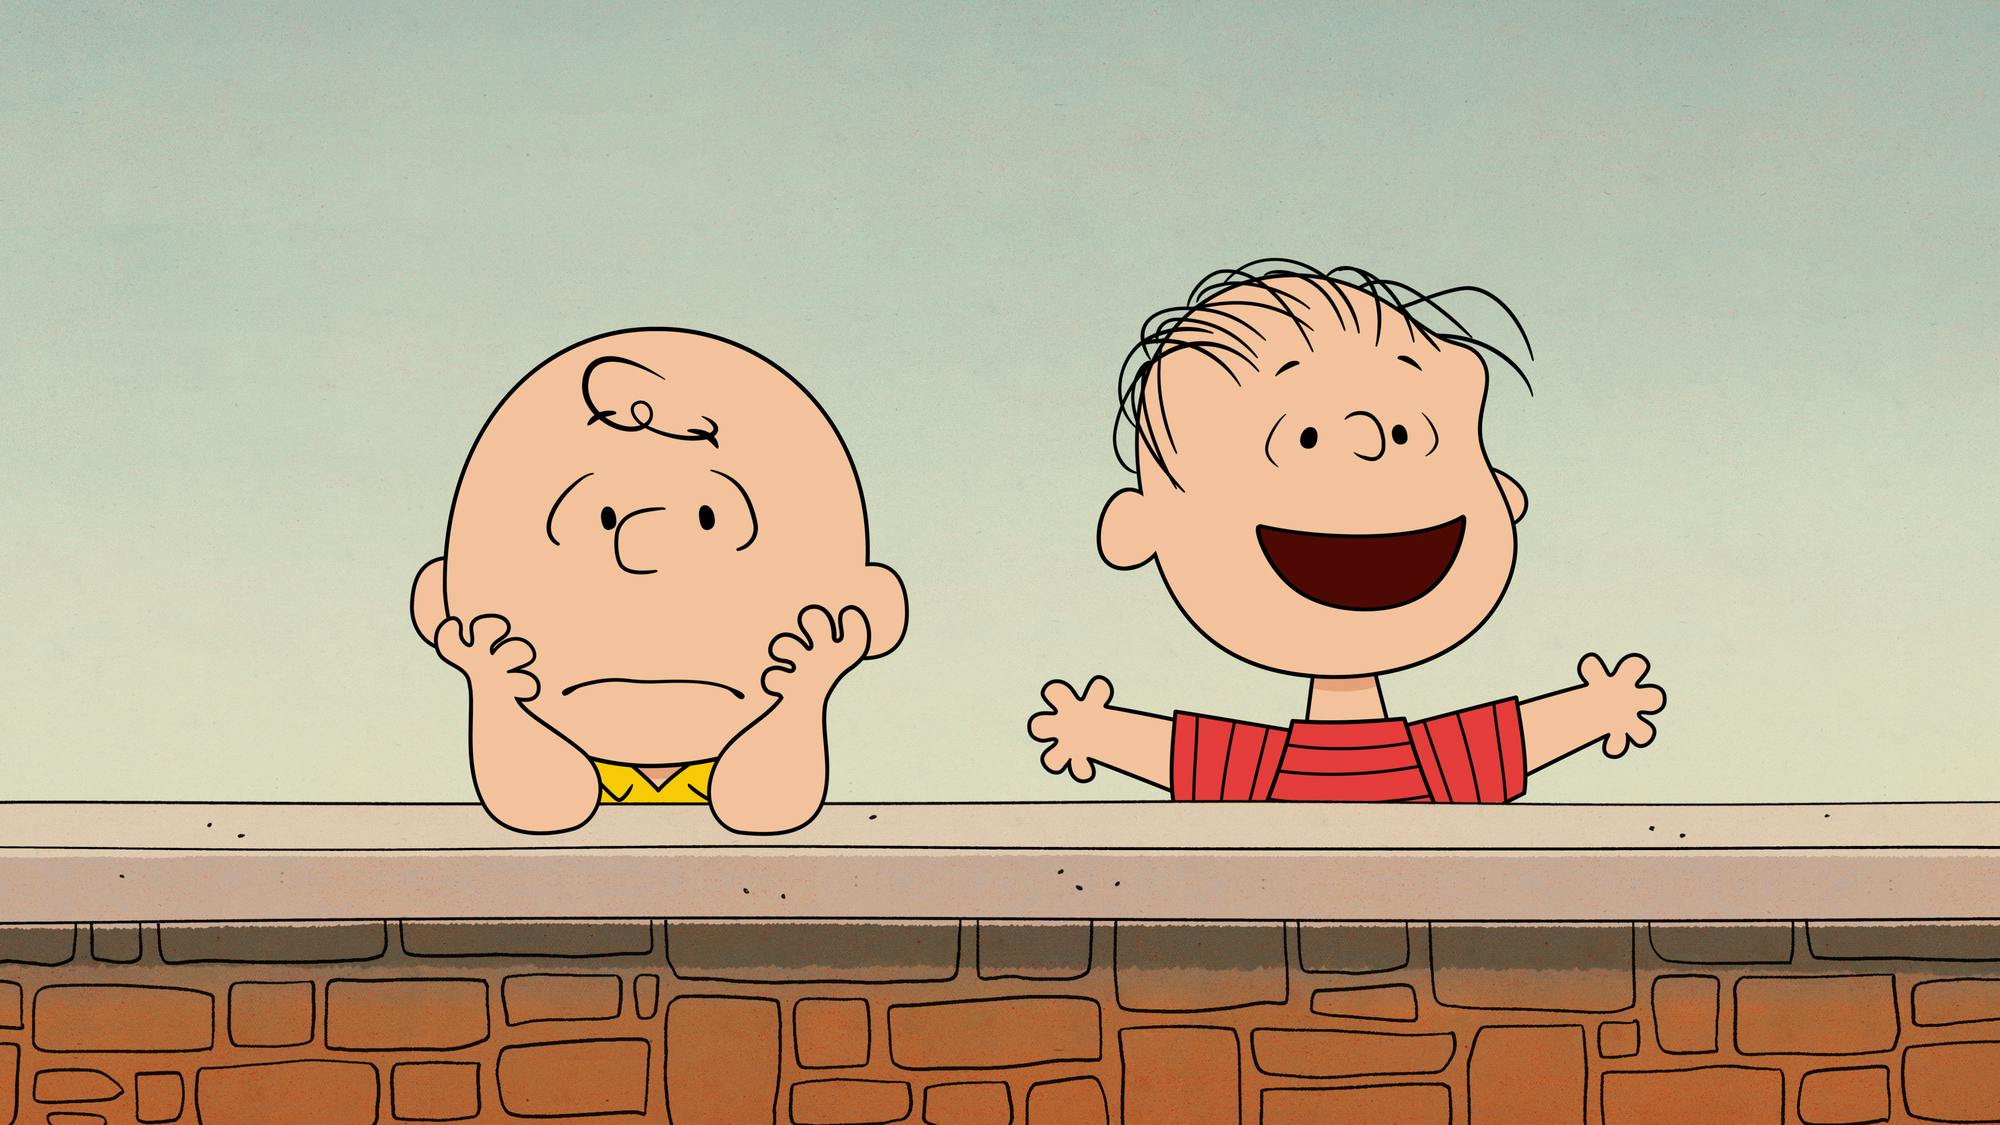 Charles Schulz's widow reveals her most relatable 'Peanuts' character